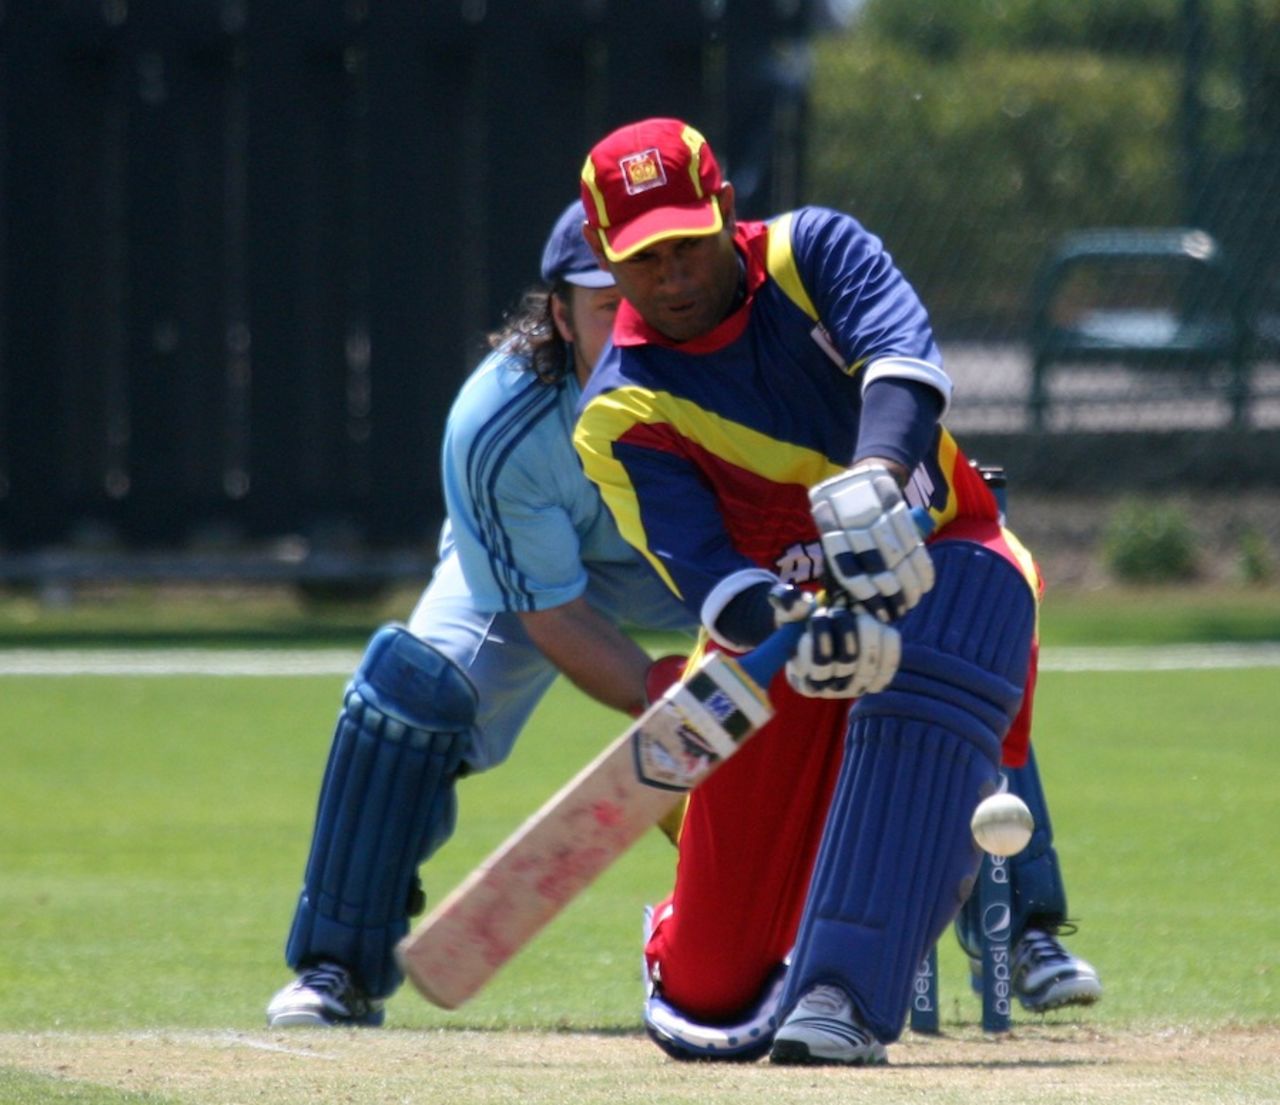 Muhammad Hanif's knock of 74 went in vain, Argentina v Bahrain, ICC World Cricket League Division Six, St Clement, July 21, 2013